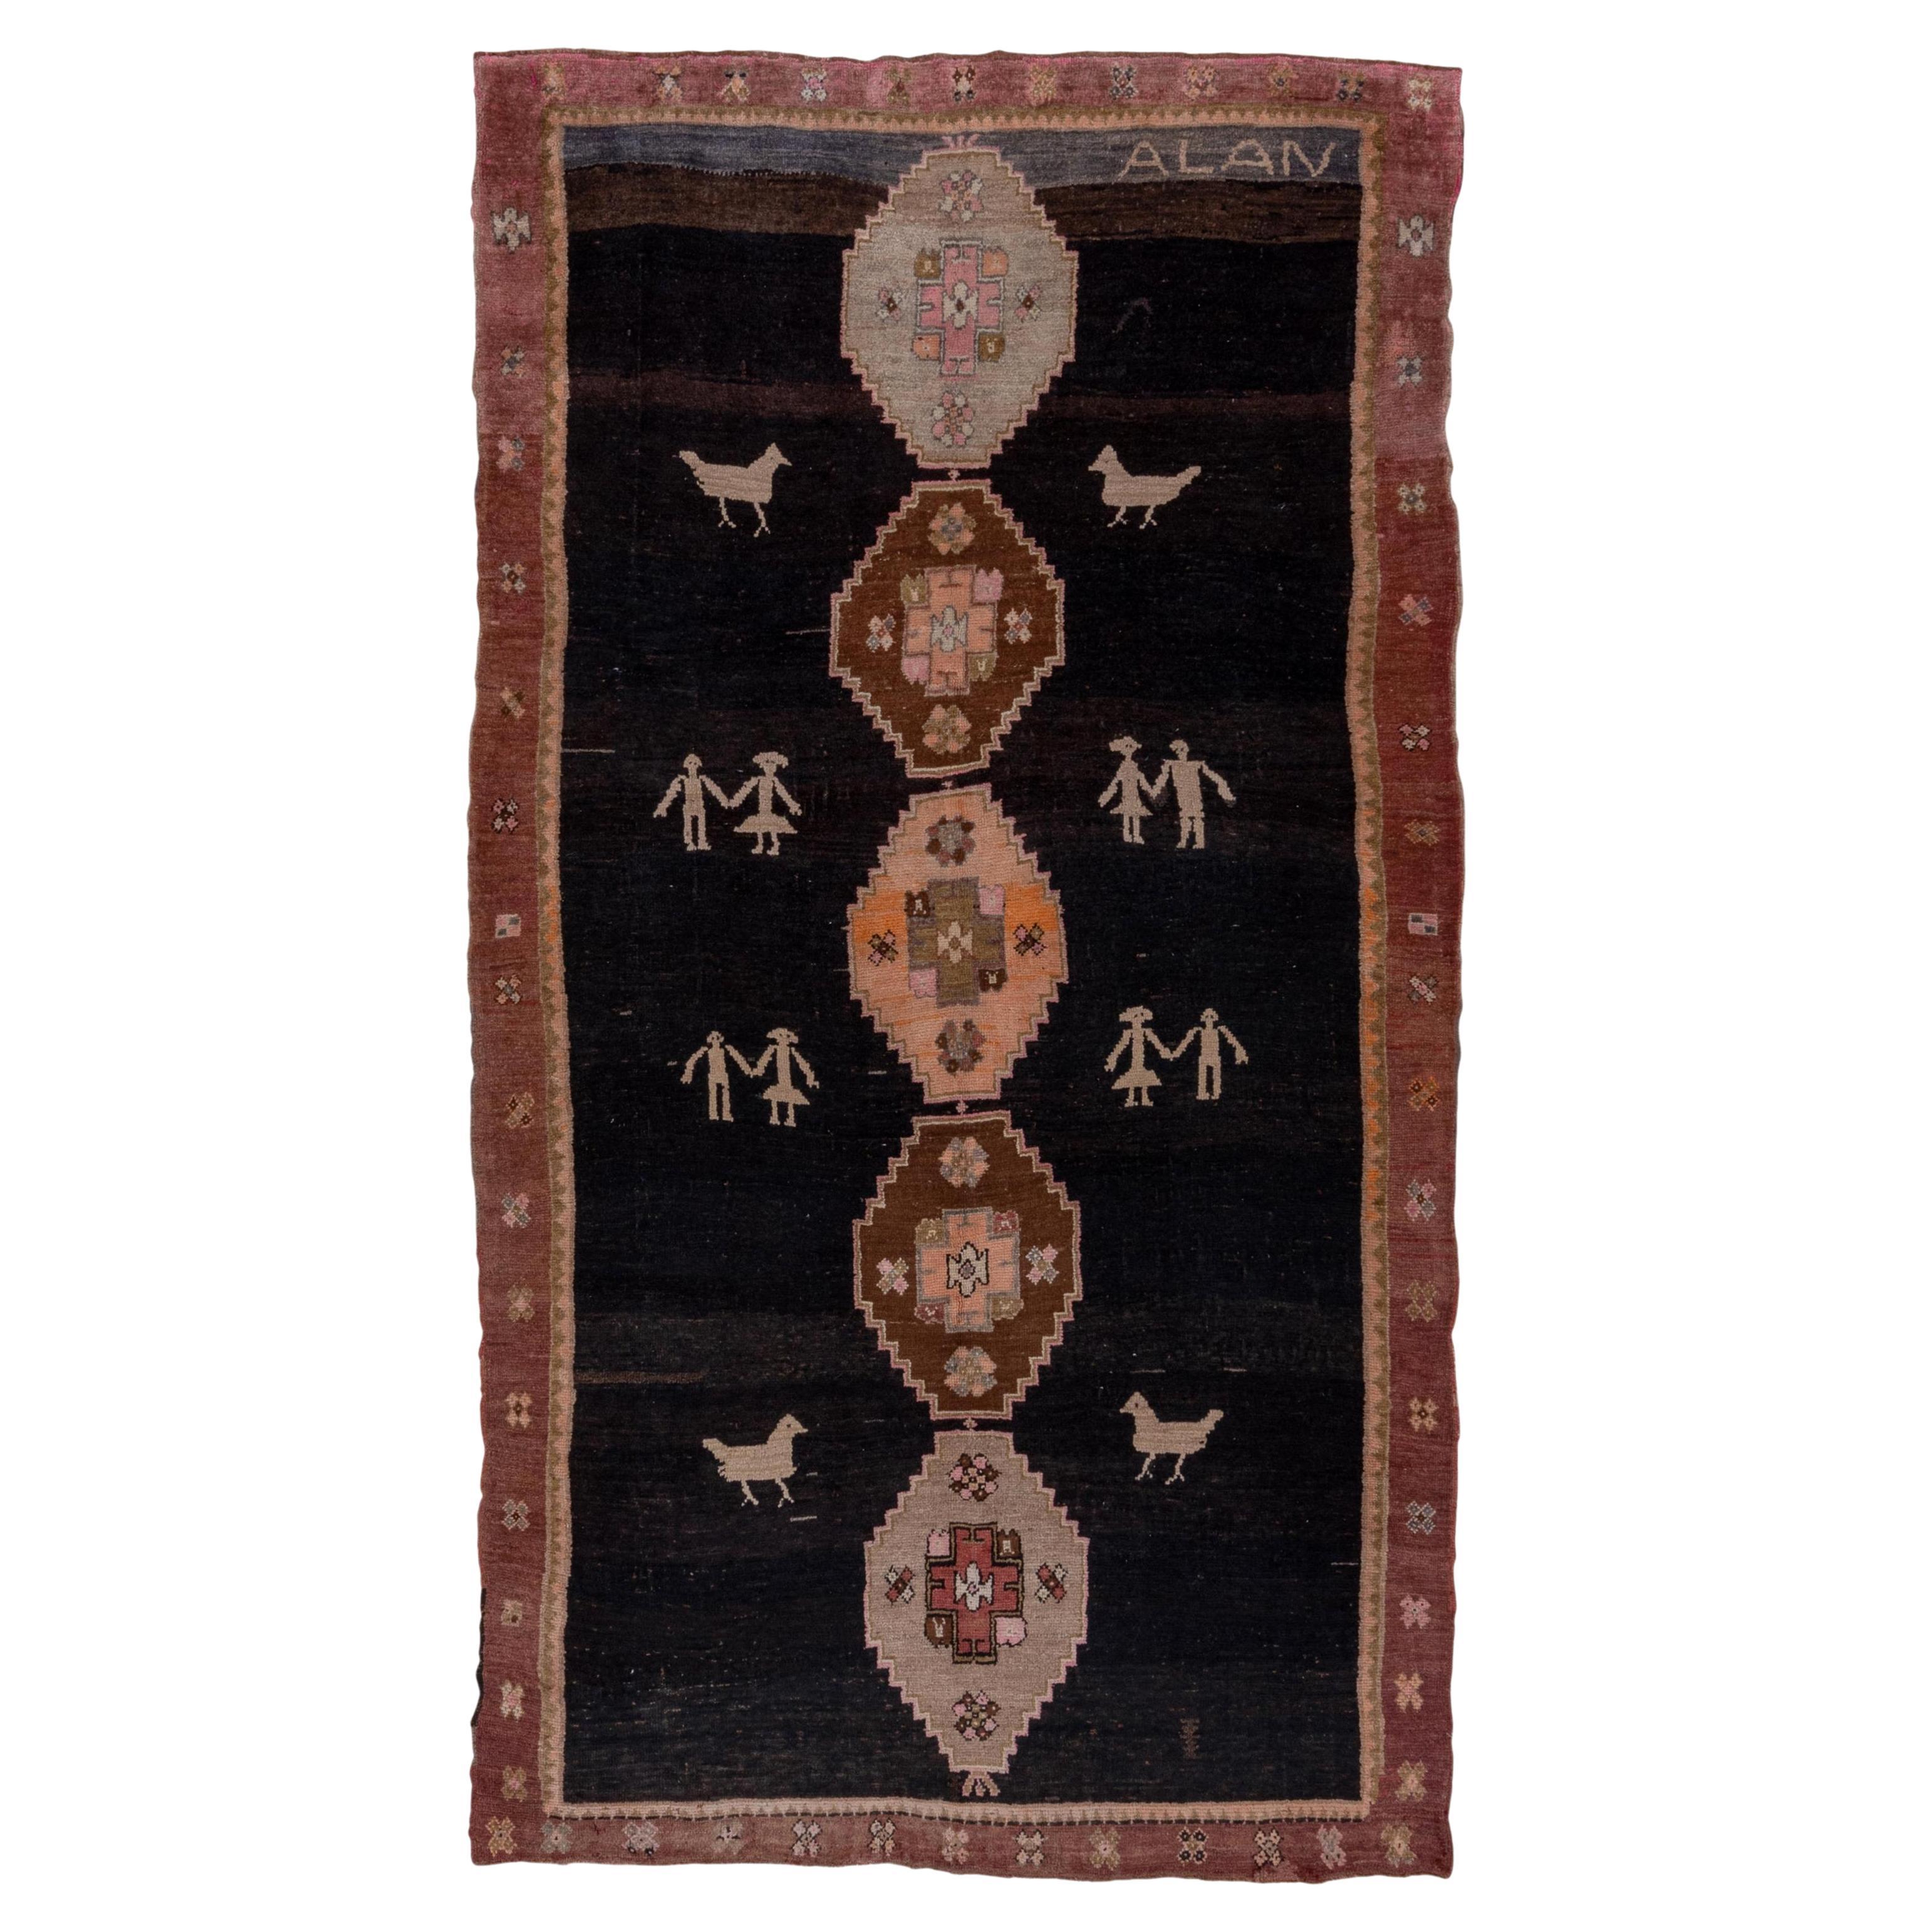 Antique Kars Rug, Black Field with Animal Motifs and People Motifs, Pink Accents